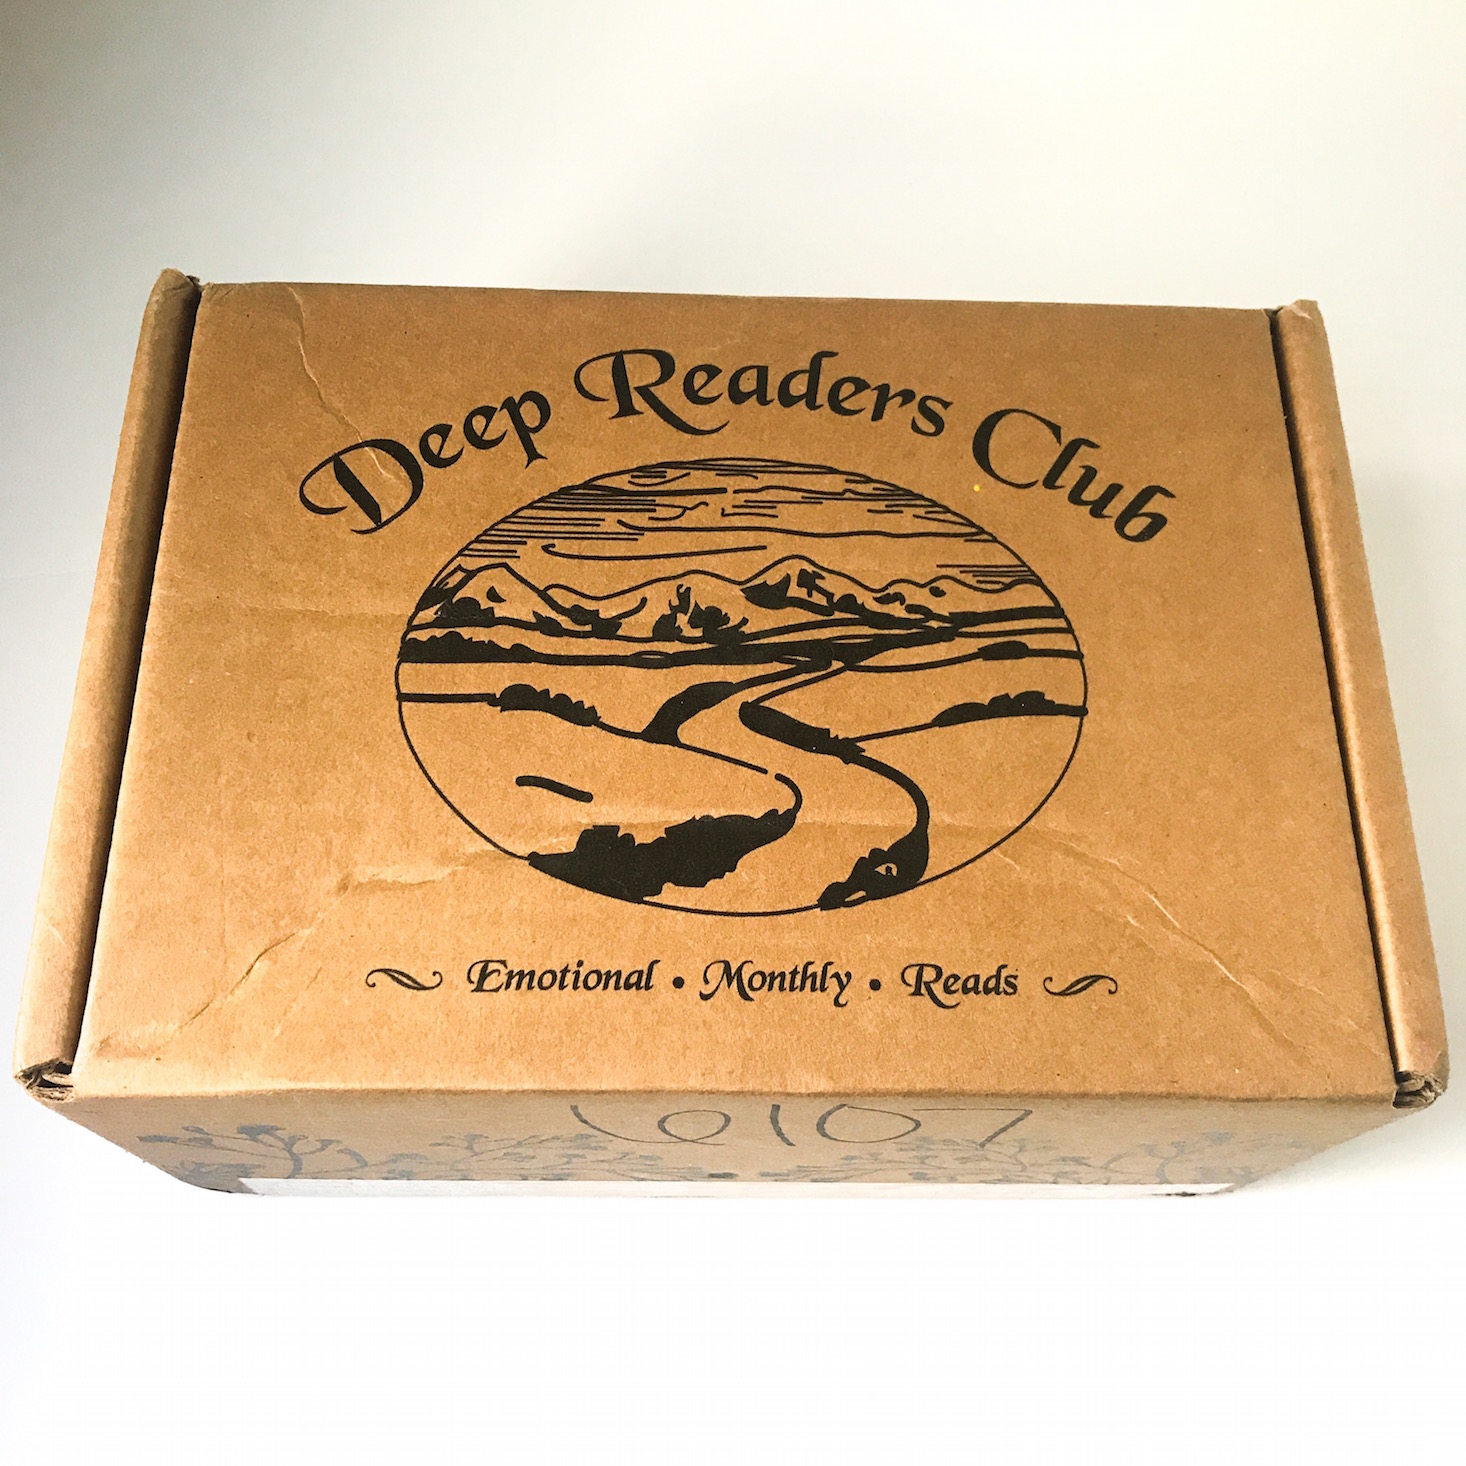 Deep Readers Club Book Subscription Review + Coupon – August 2018